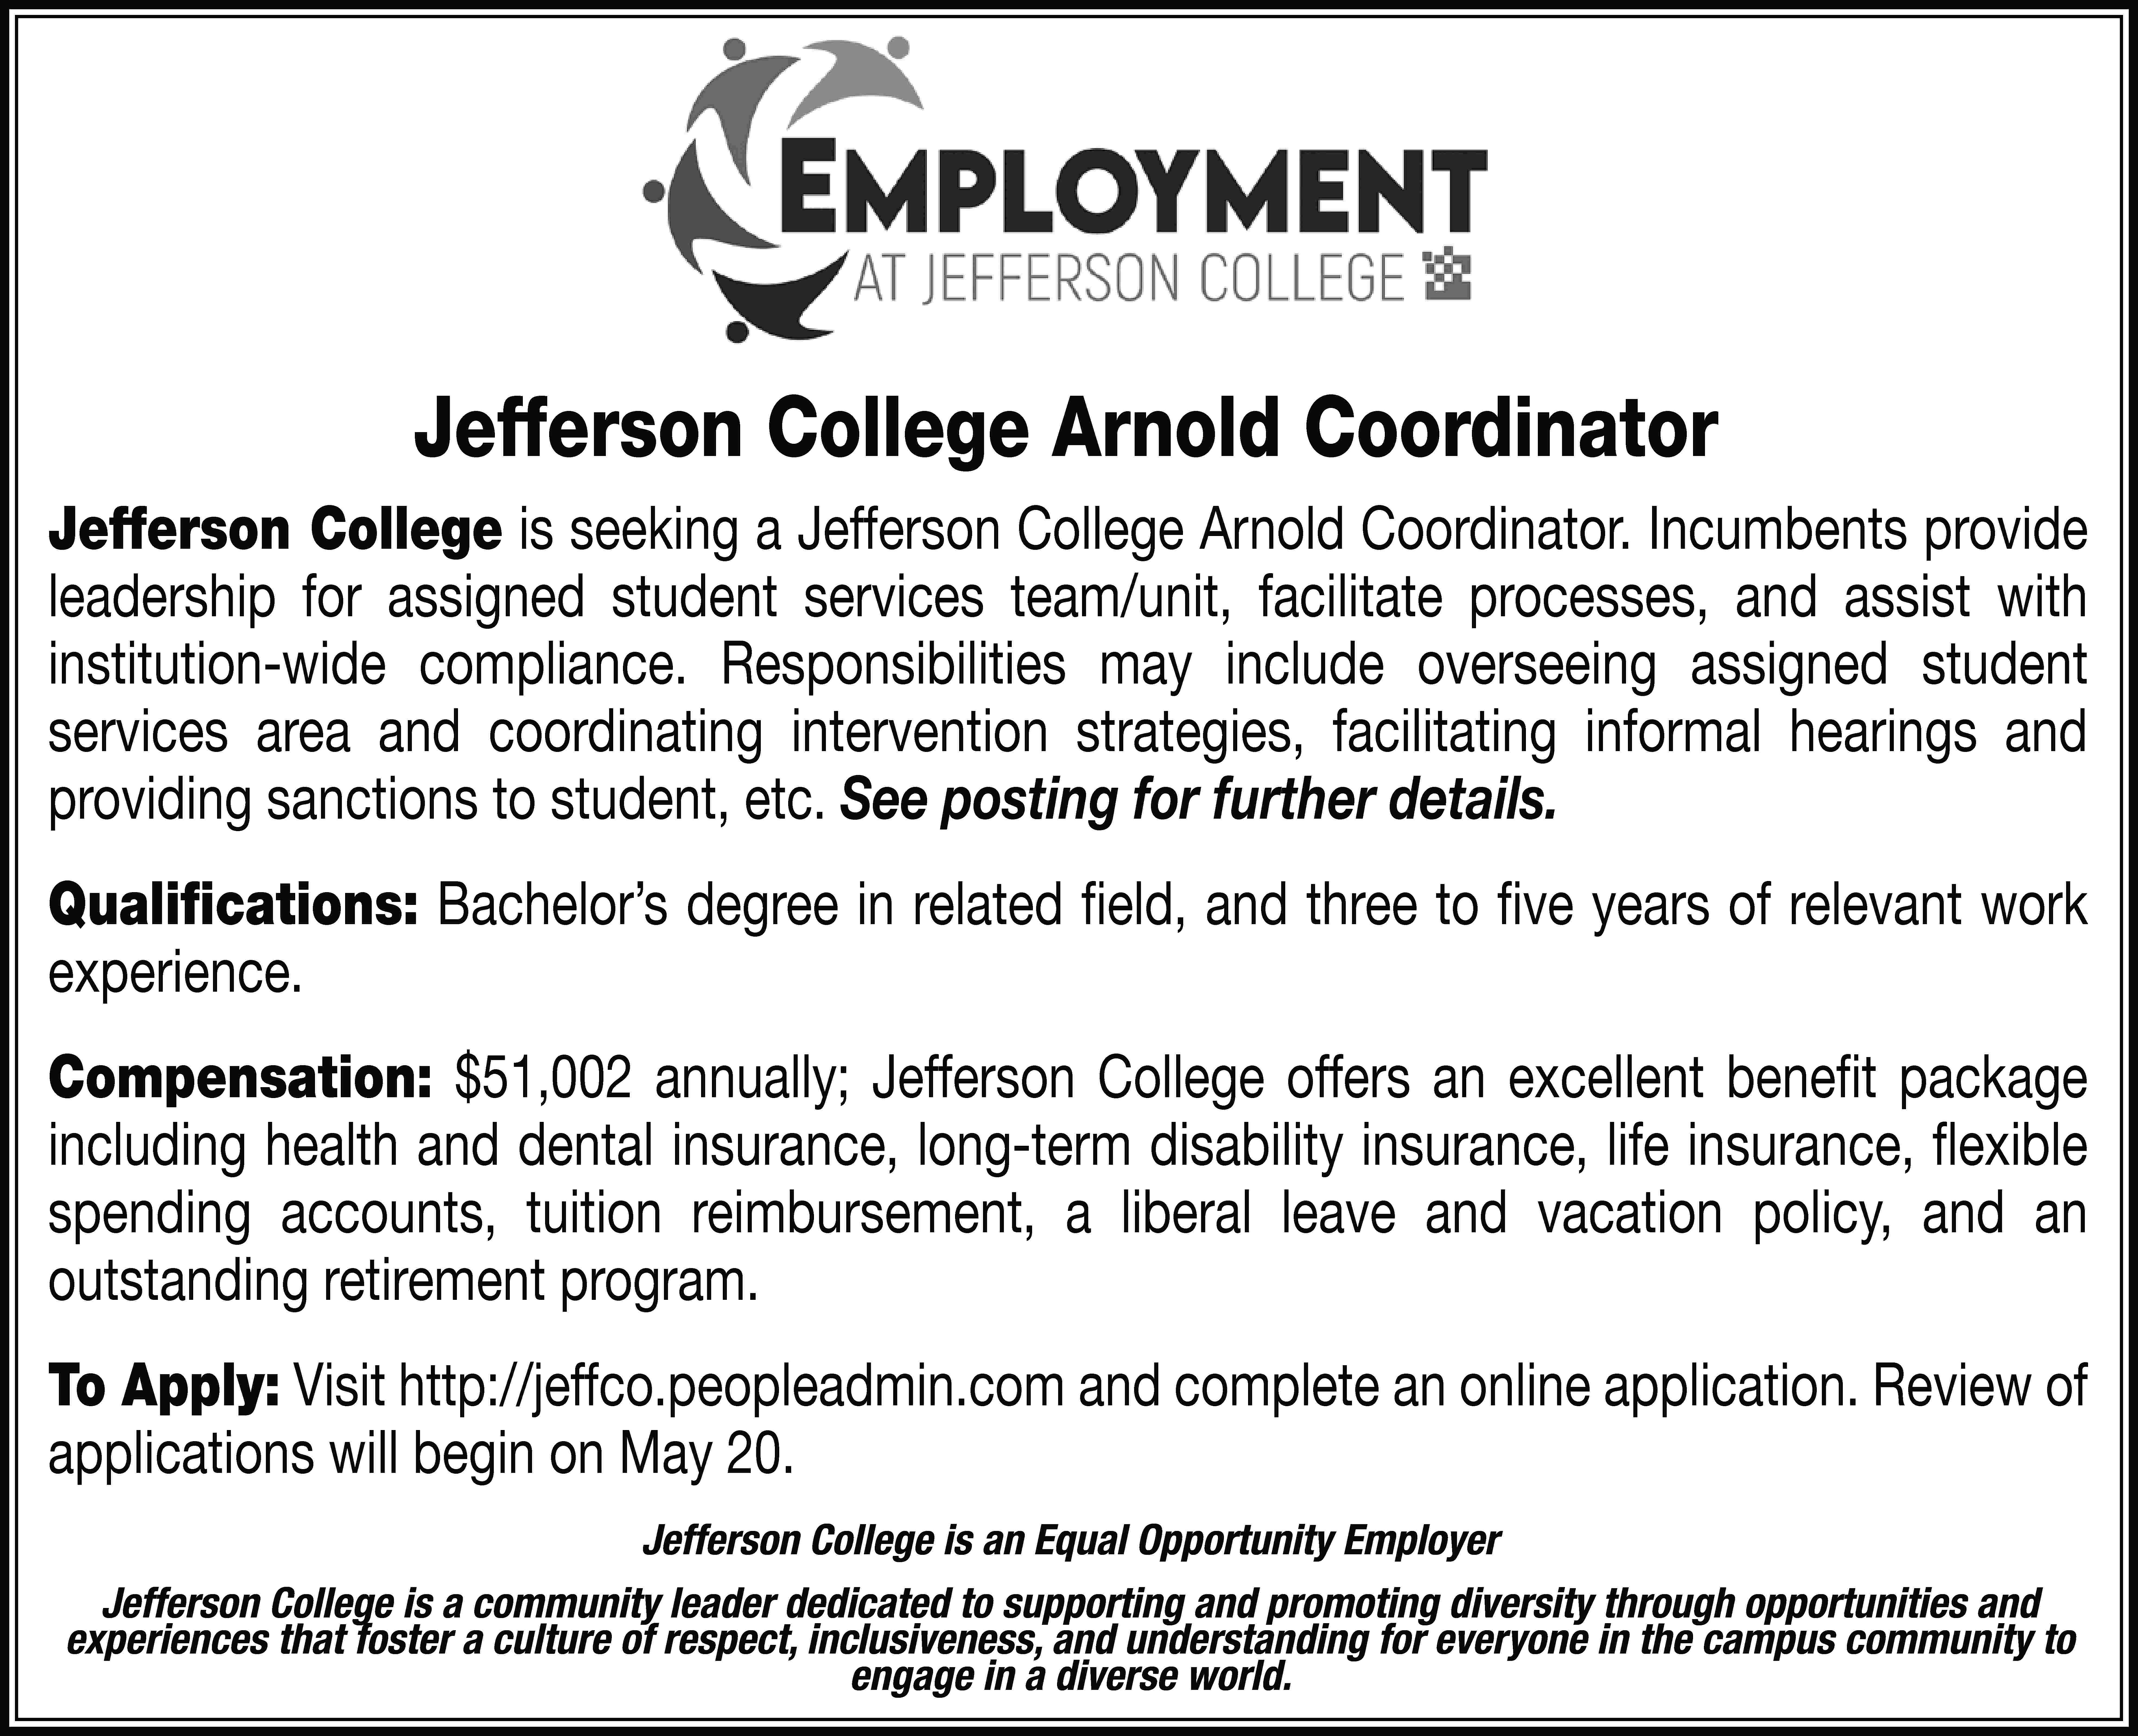 Jefferson College Arnold Coordinator Jefferson  Jefferson College Arnold Coordinator Jefferson College is seeking a Jefferson College Arnold Coordinator. Incumbents provide leadership for assigned student services team/unit, facilitate processes, and assist with institution-wide compliance. Responsibilities may include overseeing assigned student services area and coordinating intervention strategies, facilitating informal hearings and providing sanctions to student, etc. See posting for further details. Qualifications: Bachelor’s degree in related field, and three to five years of relevant work experience. Compensation: $51,002 annually; Jefferson College offers an excellent benefit package including health and dental insurance, long-term disability insurance, life insurance, flexible spending accounts, tuition reimbursement, a liberal leave and vacation policy, and an outstanding retirement program. To Apply: Visit http://jeffco.peopleadmin.com and complete an online application. Review of applications will begin on May 20. Jefferson College is an Equal Opportunity Employer Jefferson College is a community leader dedicated to supporting and promoting diversity through opportunities and experiences that foster a culture of respect, inclusiveness, and understanding for everyone in the campus community to engage in a diverse world.